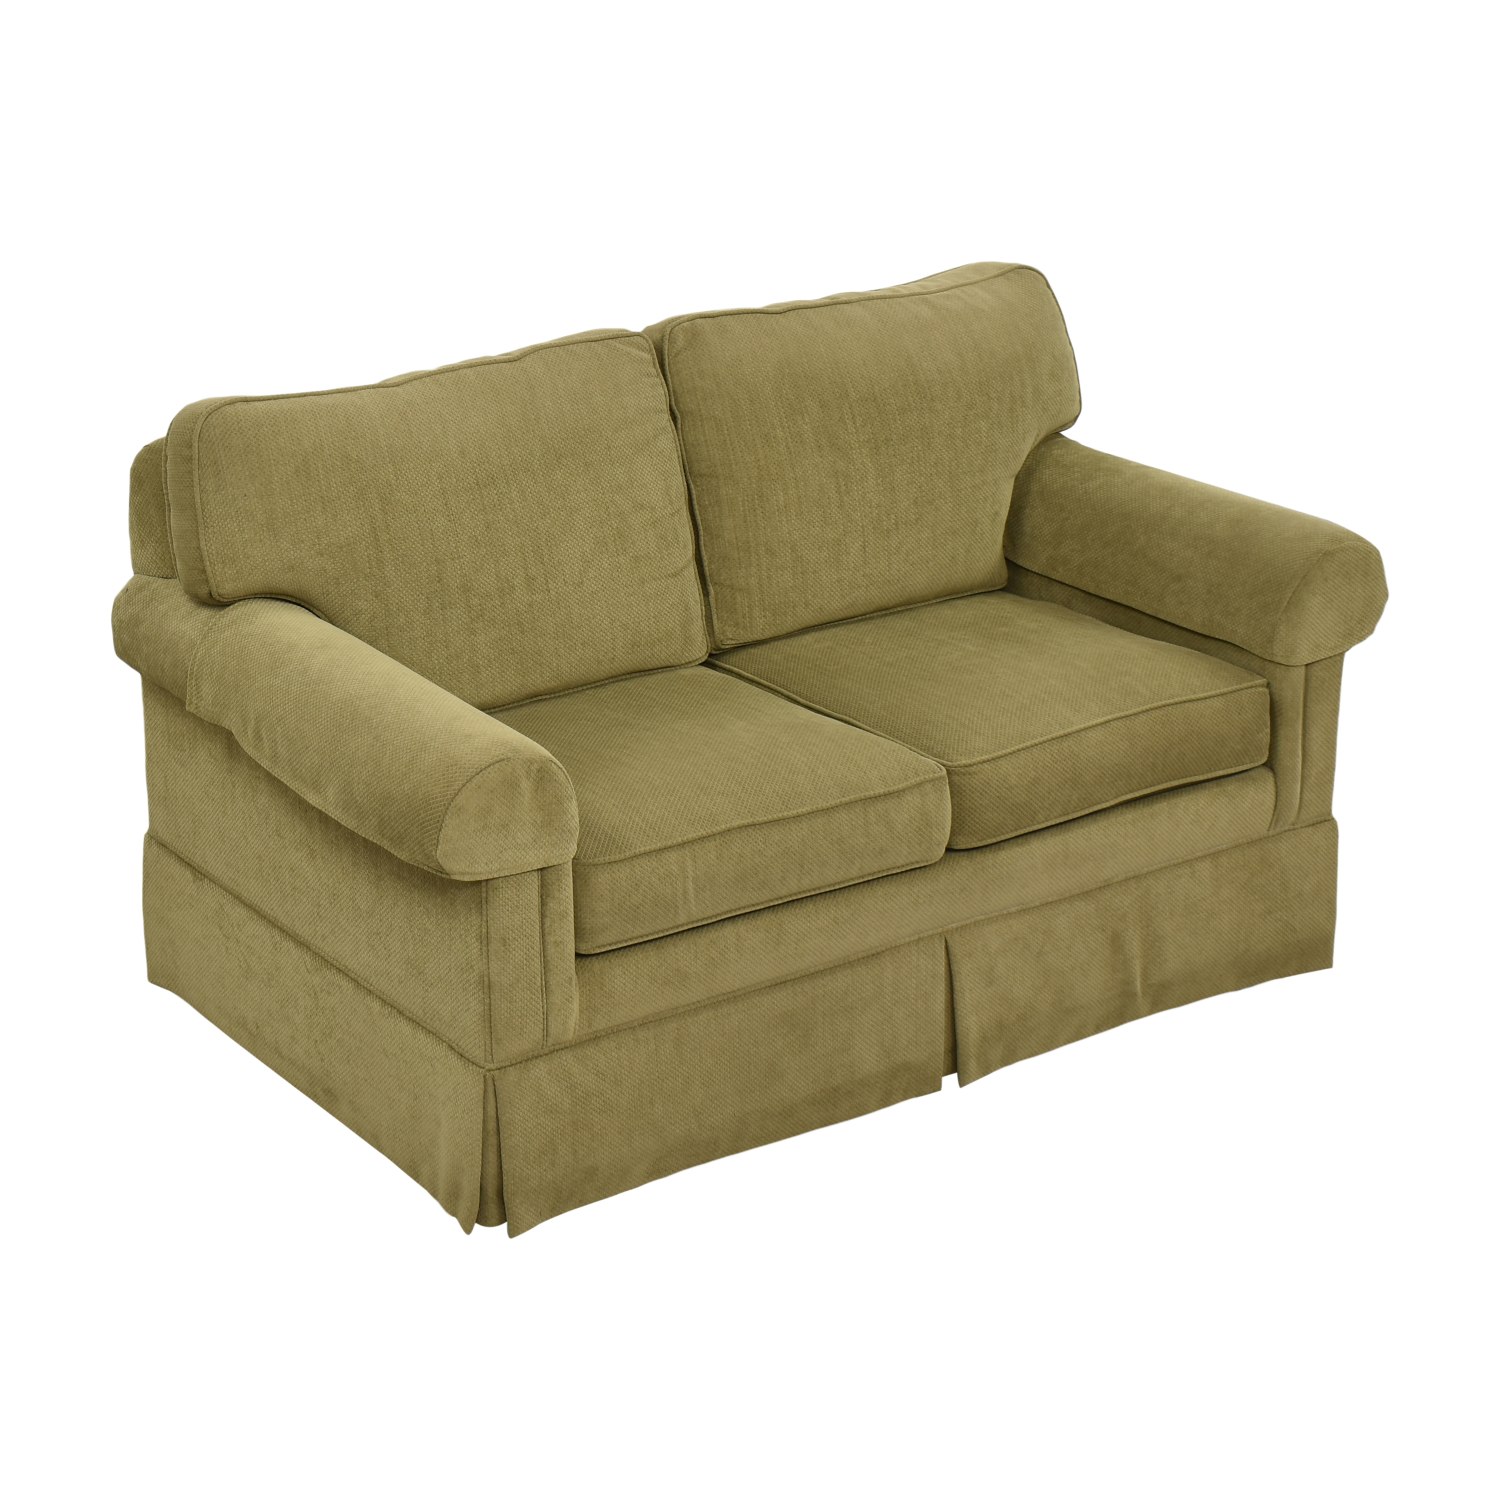 Ethan Allen Ethan Allen Conor Skirted Love Seat  dimensions